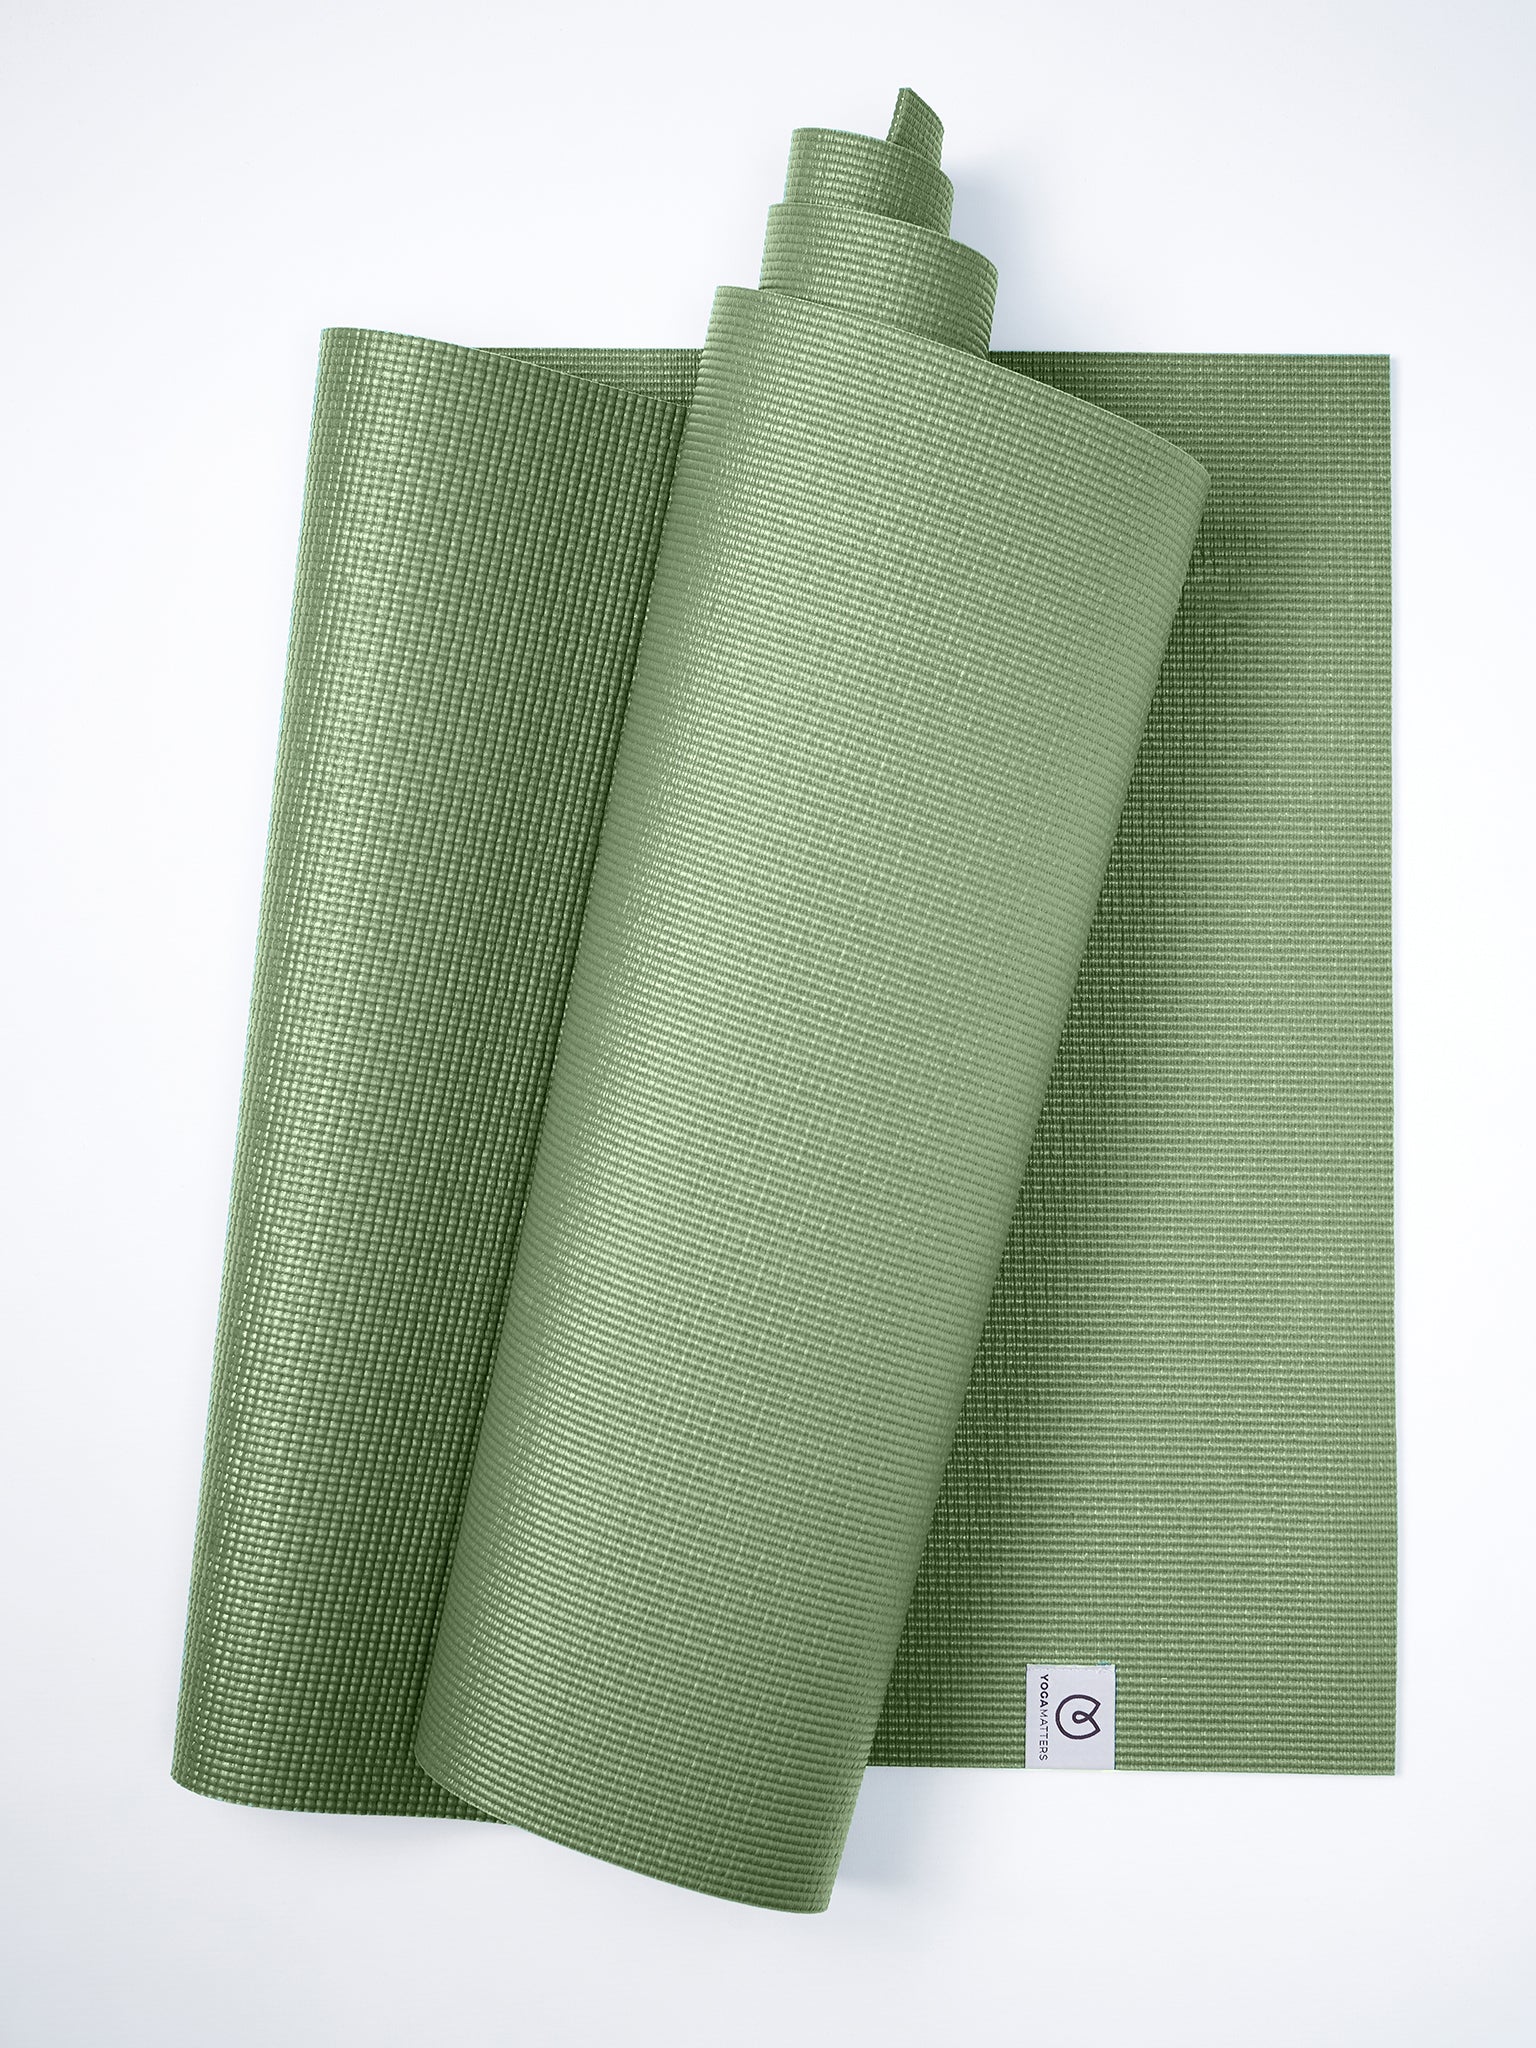 Green textured yoga mat partially rolled up on a white background, top view, with visible brand logo on the corner.